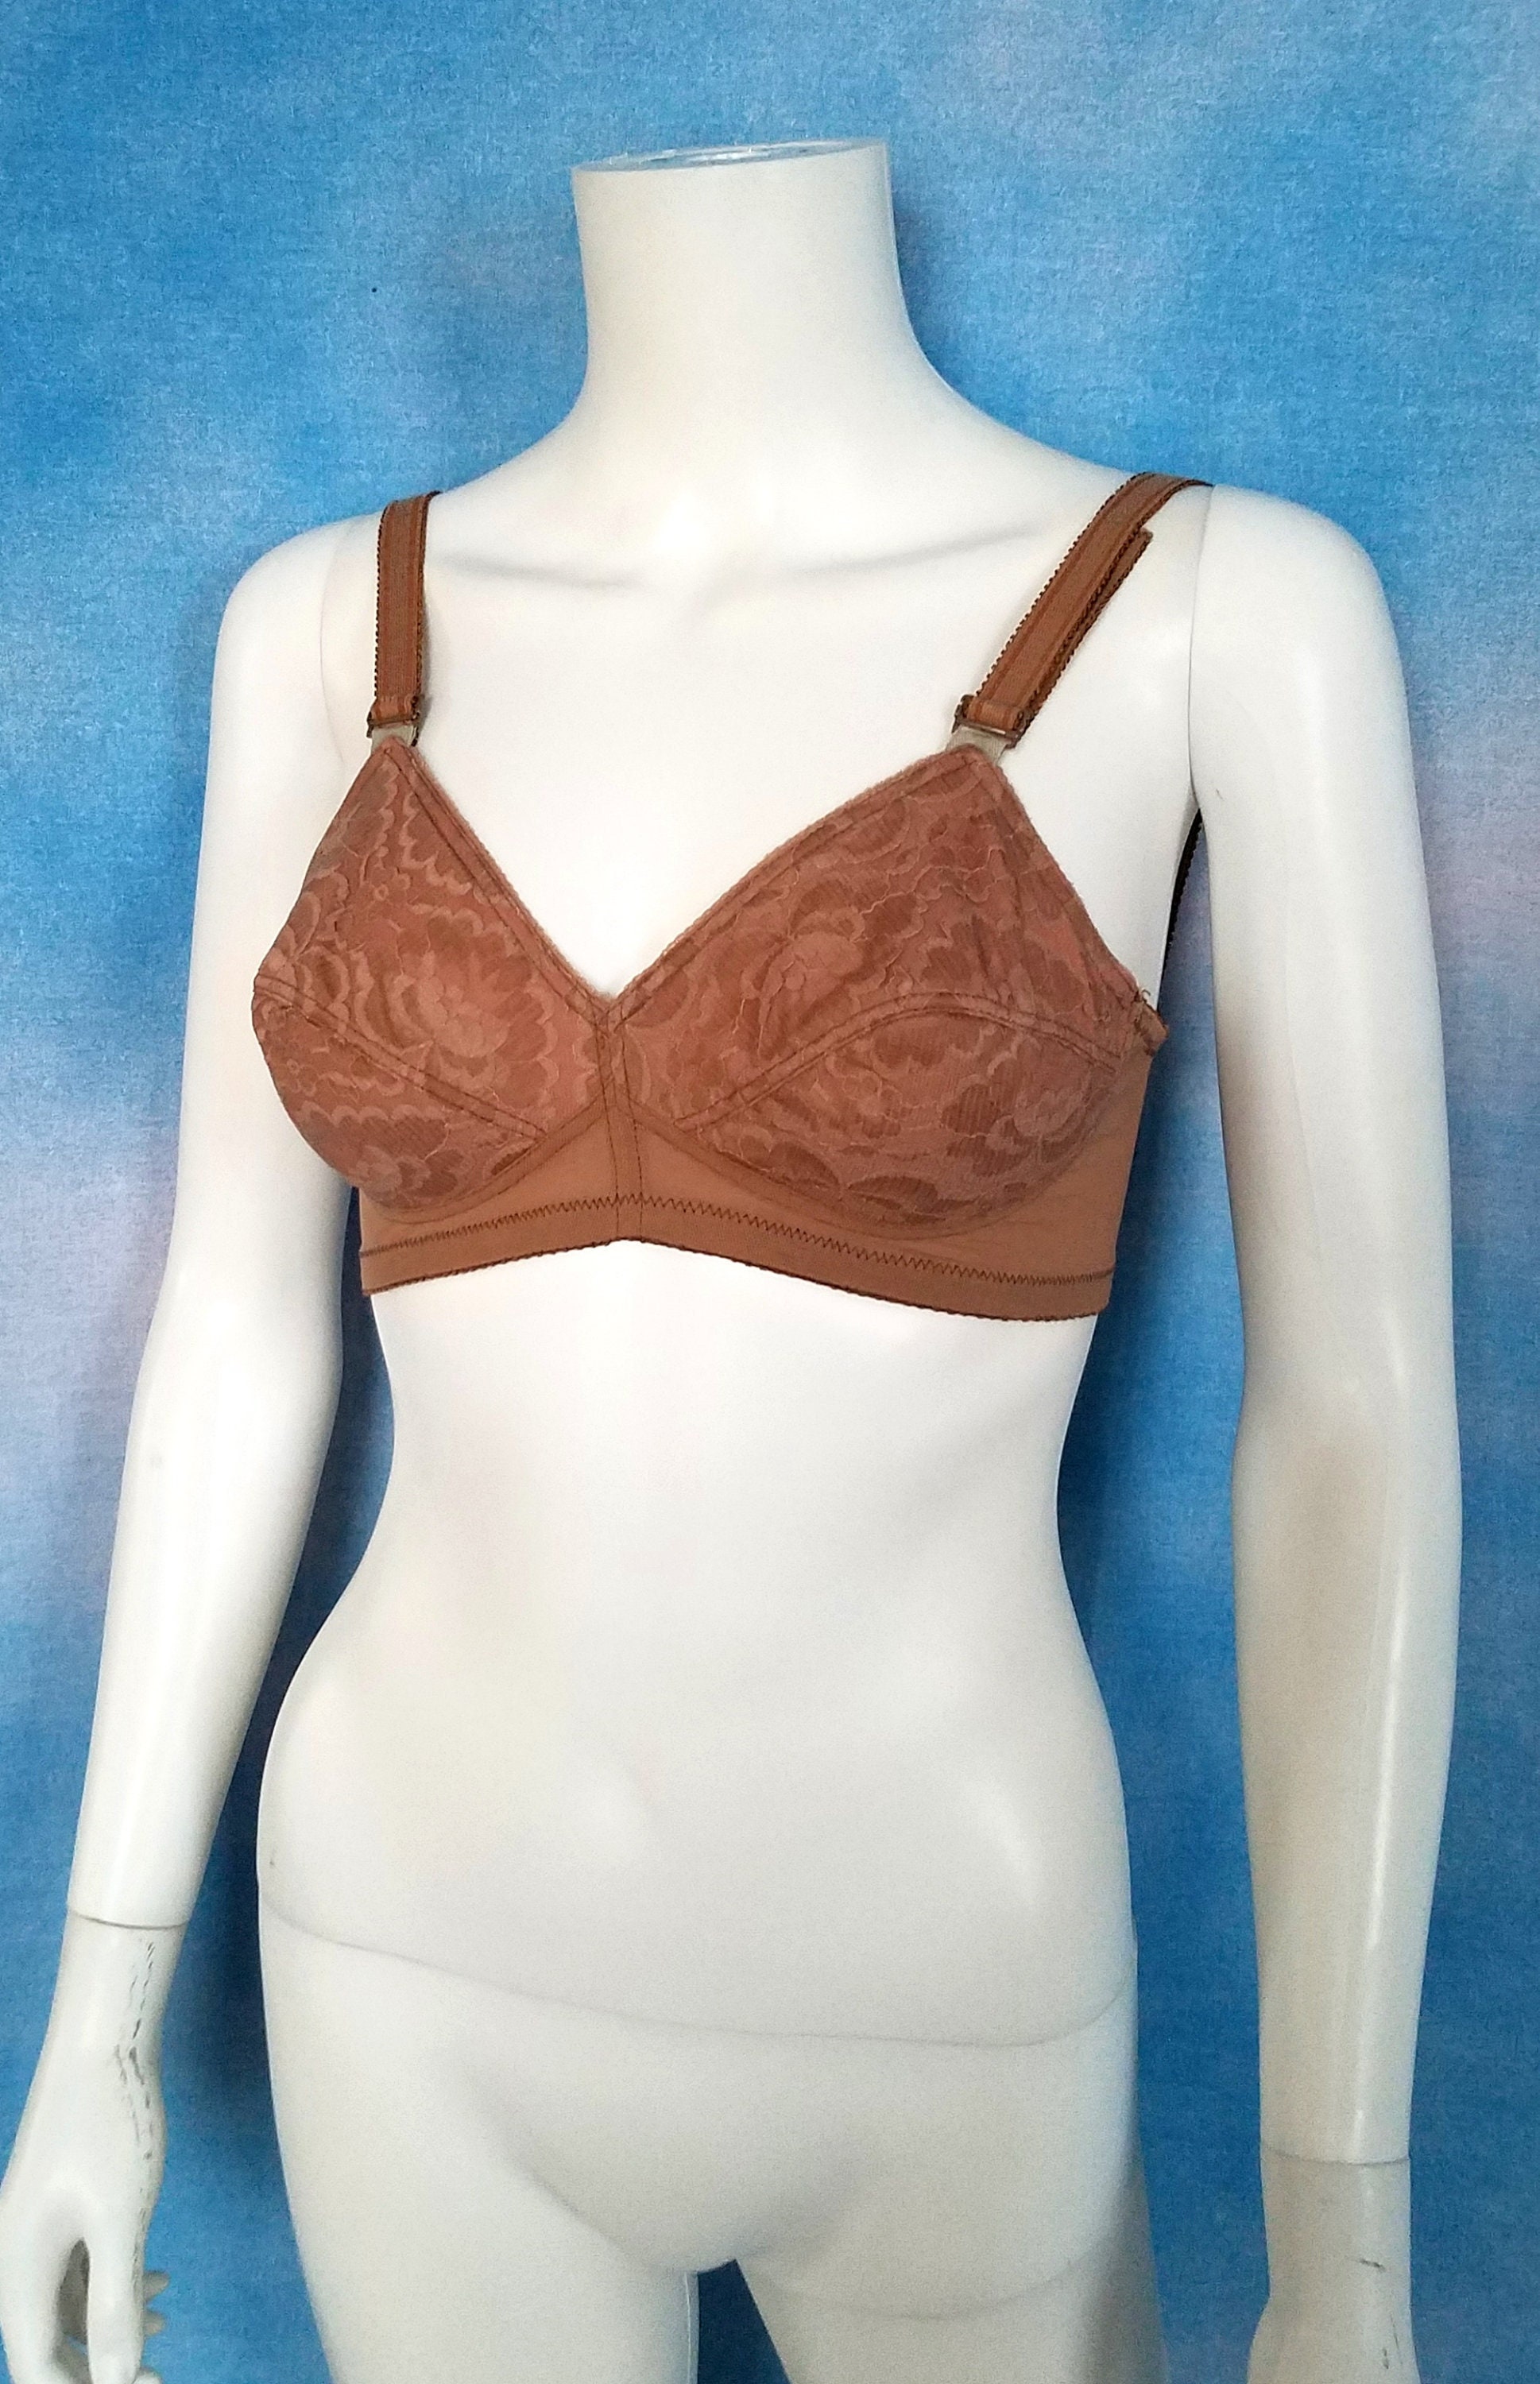 Maidenform Self Expressions 2 Size 36B Girls Bras one Tan one